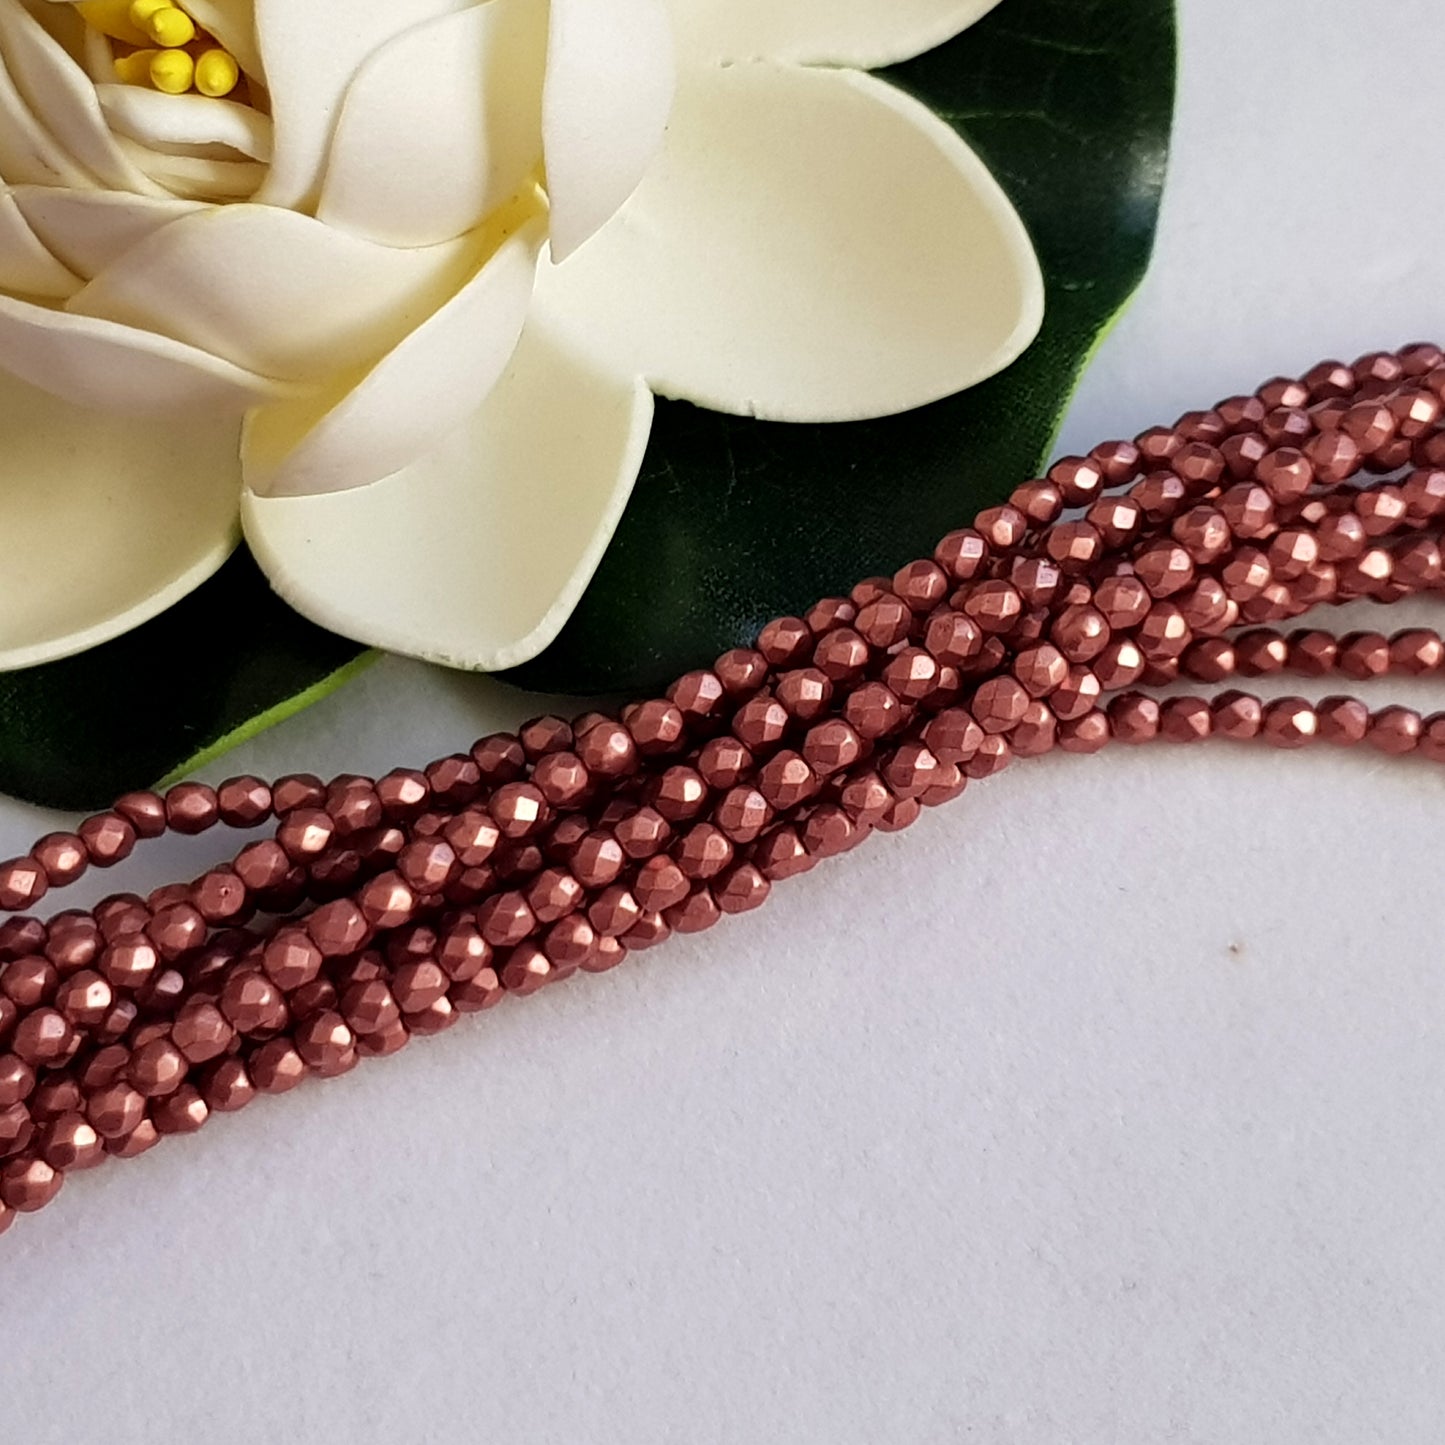 Czech Fire Polished 50 Bead Strand - Suede Gold Lantana 3mm Round Faceted  |  FP-08A02-CB-03 | Beading Supply